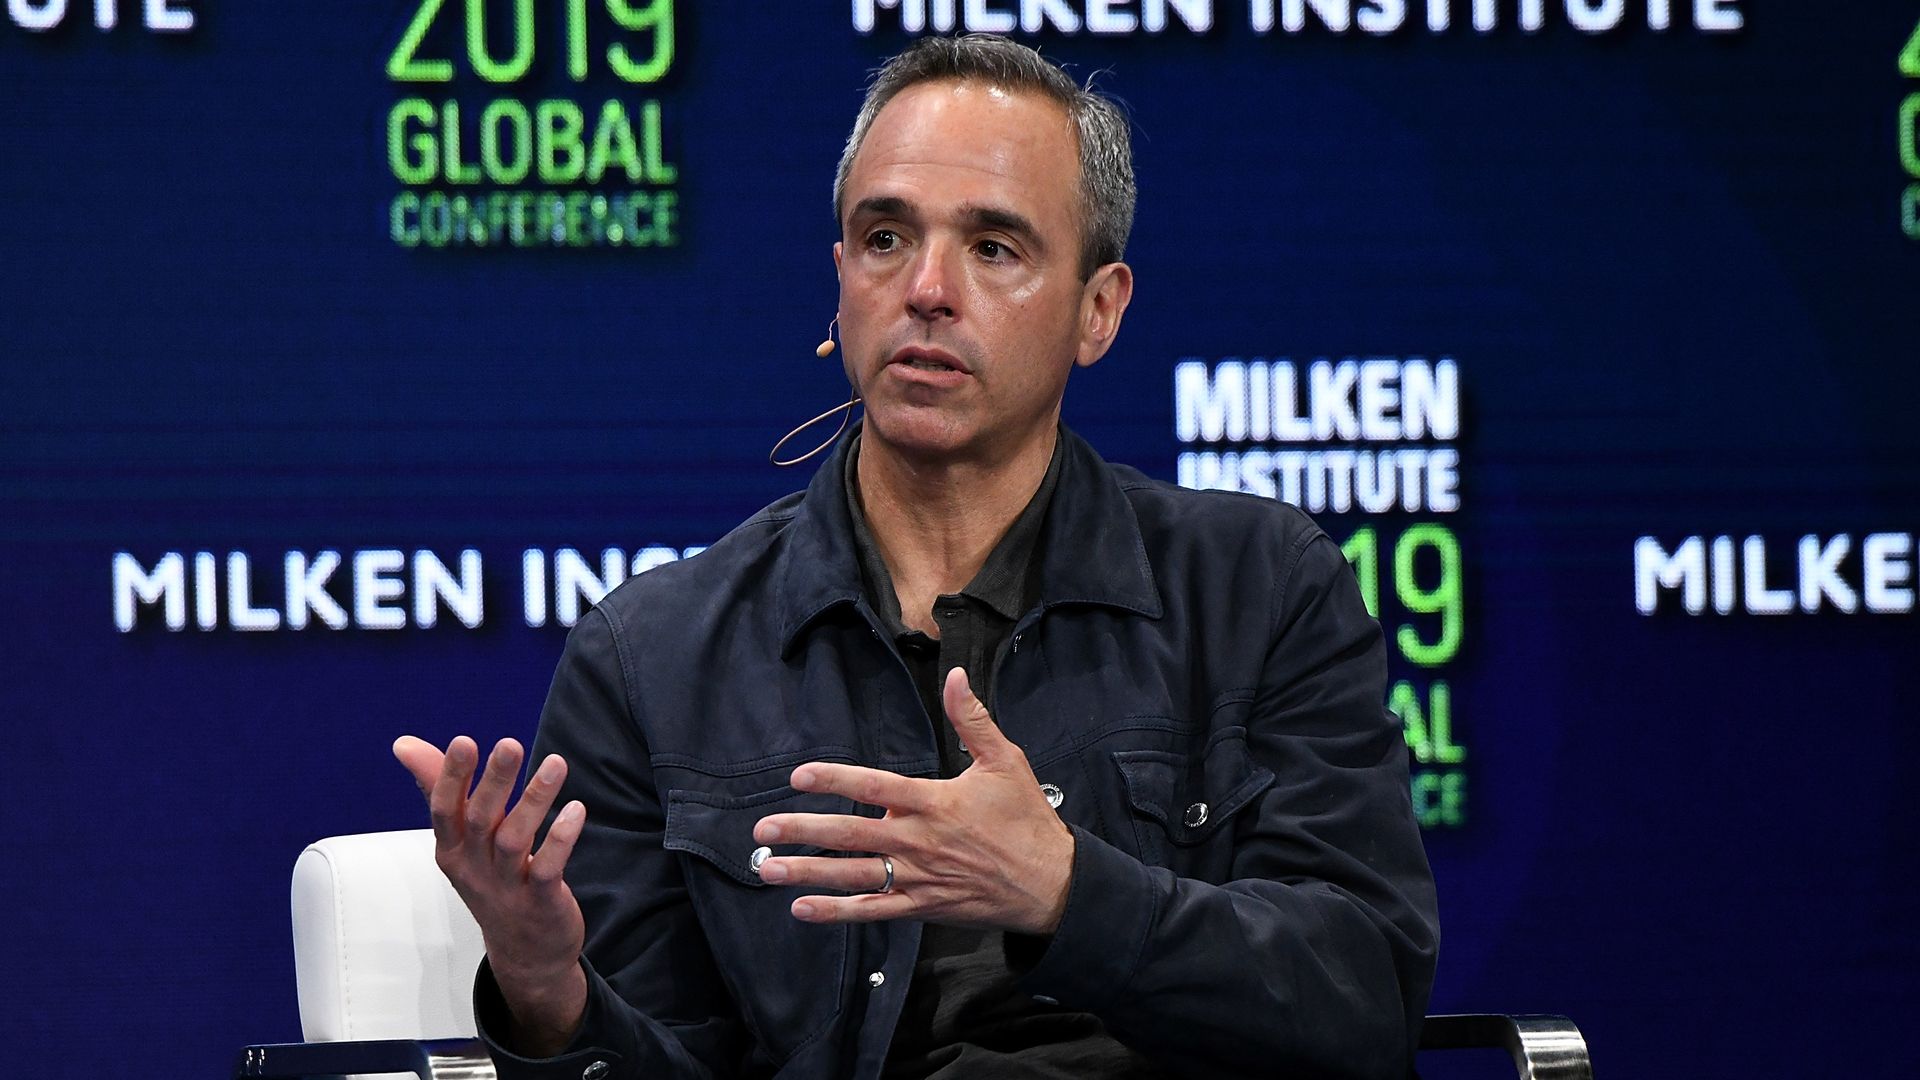 Modi Wiczyk, co-CEO of Valence Media and Media Rights Capital, speaks on a panel at The Beverly Hilton Hotel on April 29, 2019.